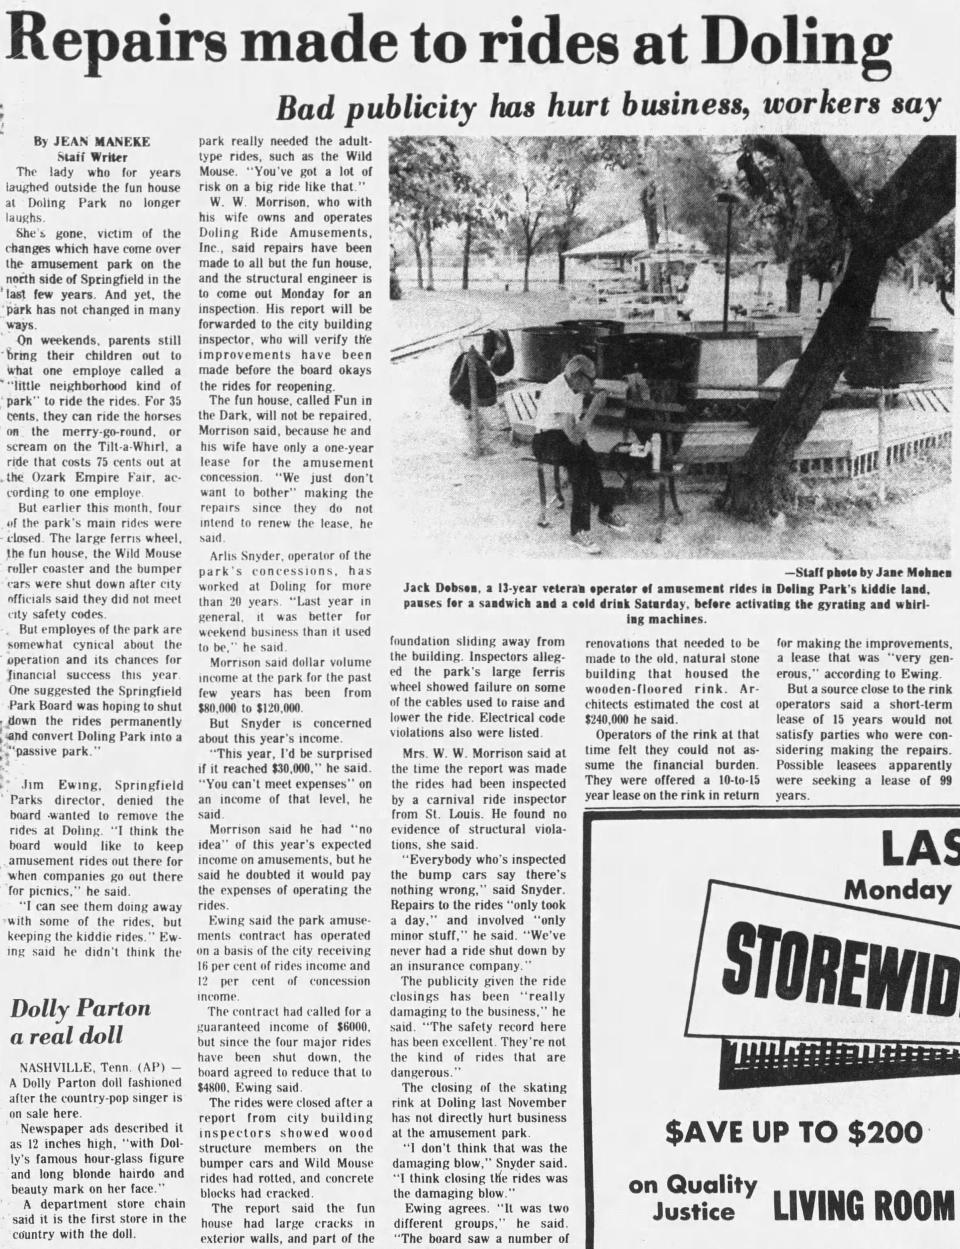 A newspaper clipping about necessary repairs needed at the now-defunct Doling Amusement Park, printed in the Springfield Leader and Press on June 19, 1977.